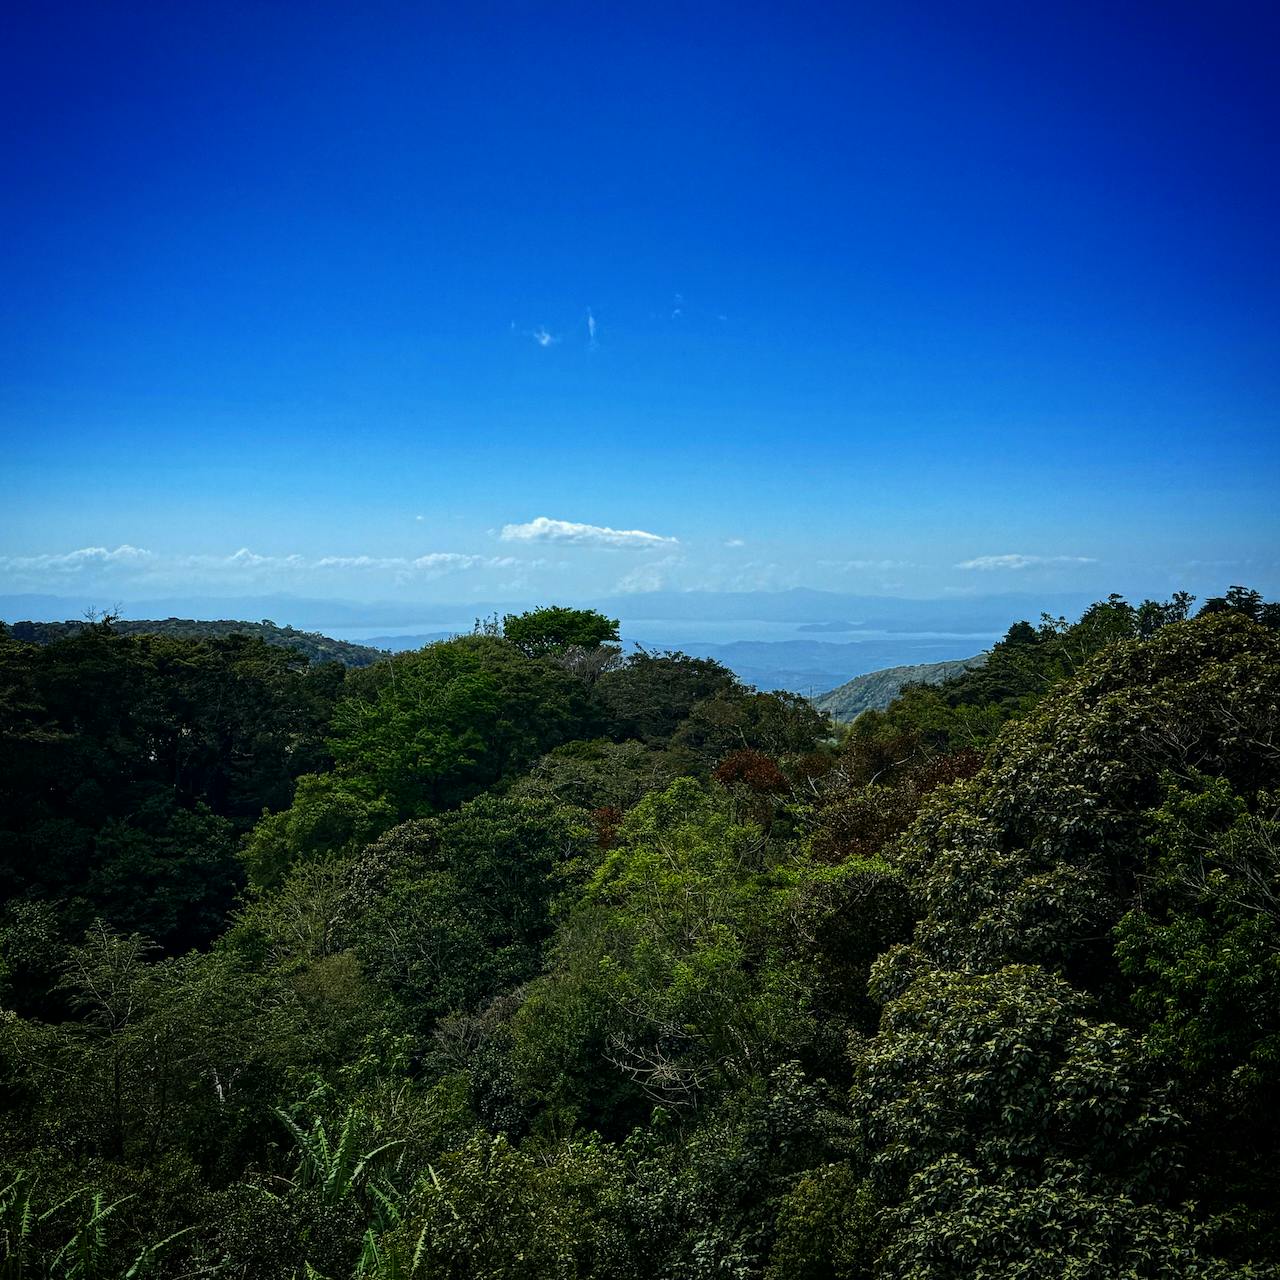 View of the Nicoya Gulf and Peninsula, from Monteverde. Blue sky, lush jungle.